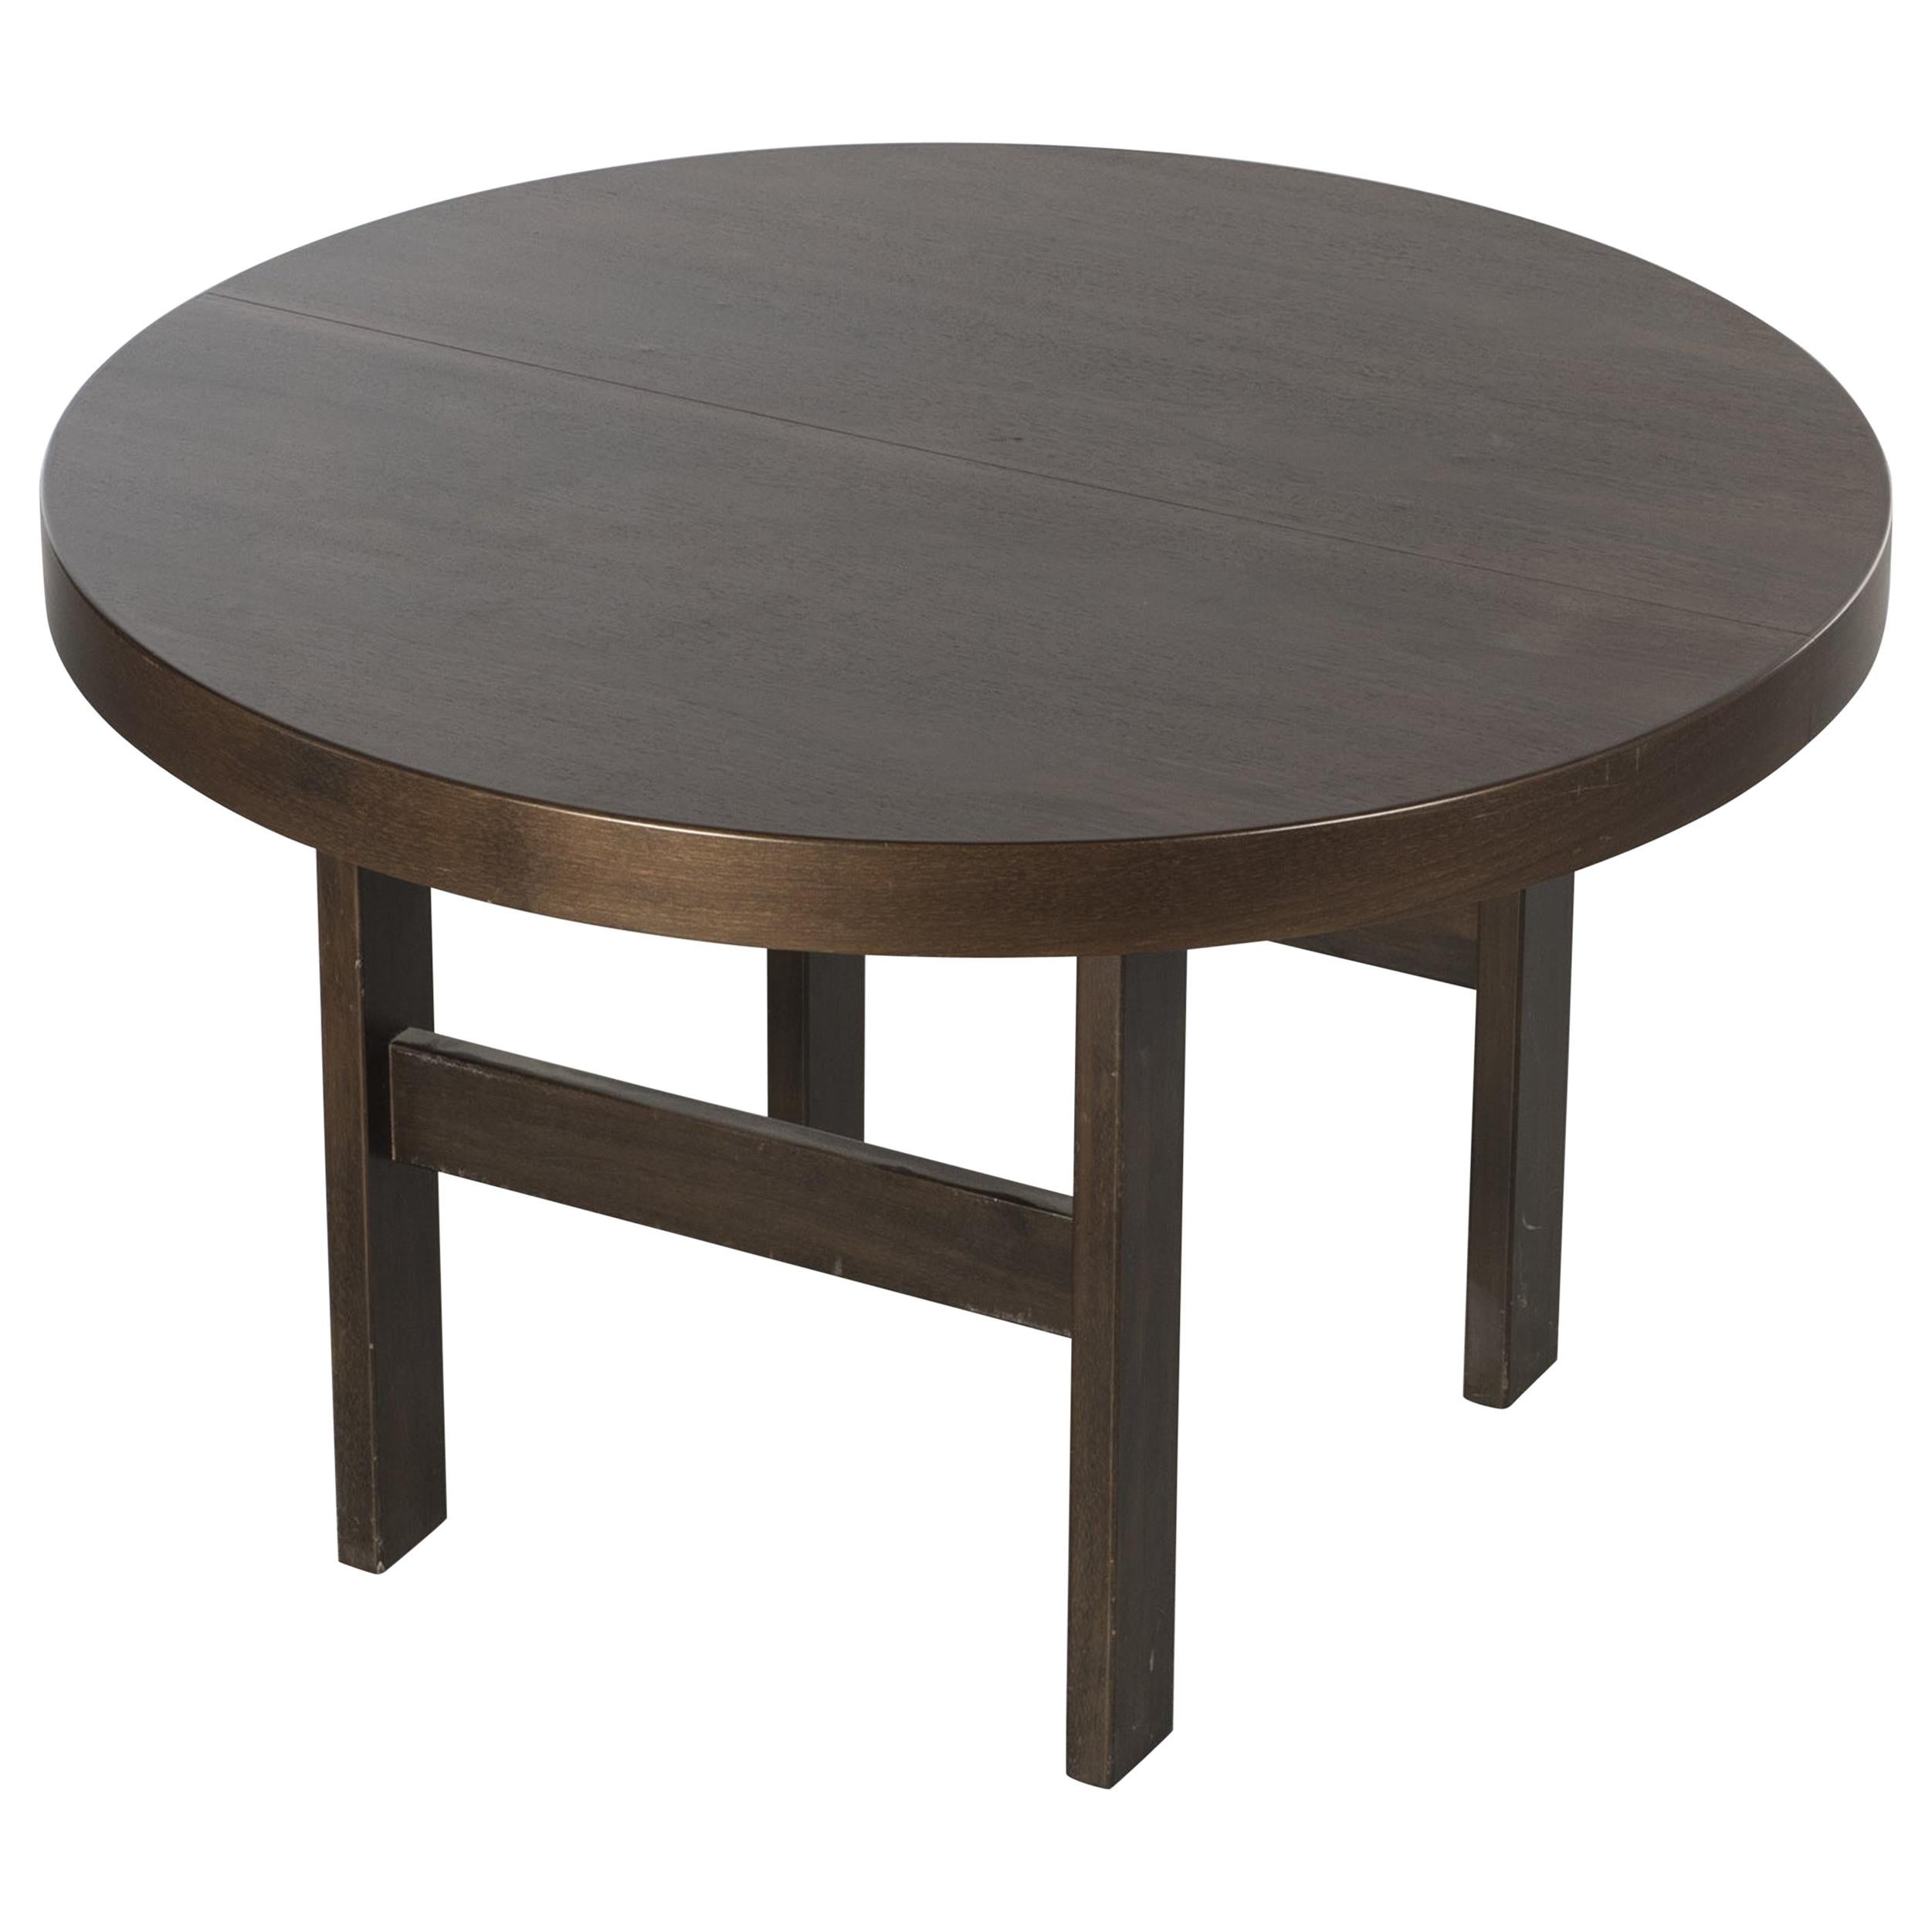 Round/Oval Table with Extension Leaves in Veneered Oak, Black Stained, 1960s For Sale